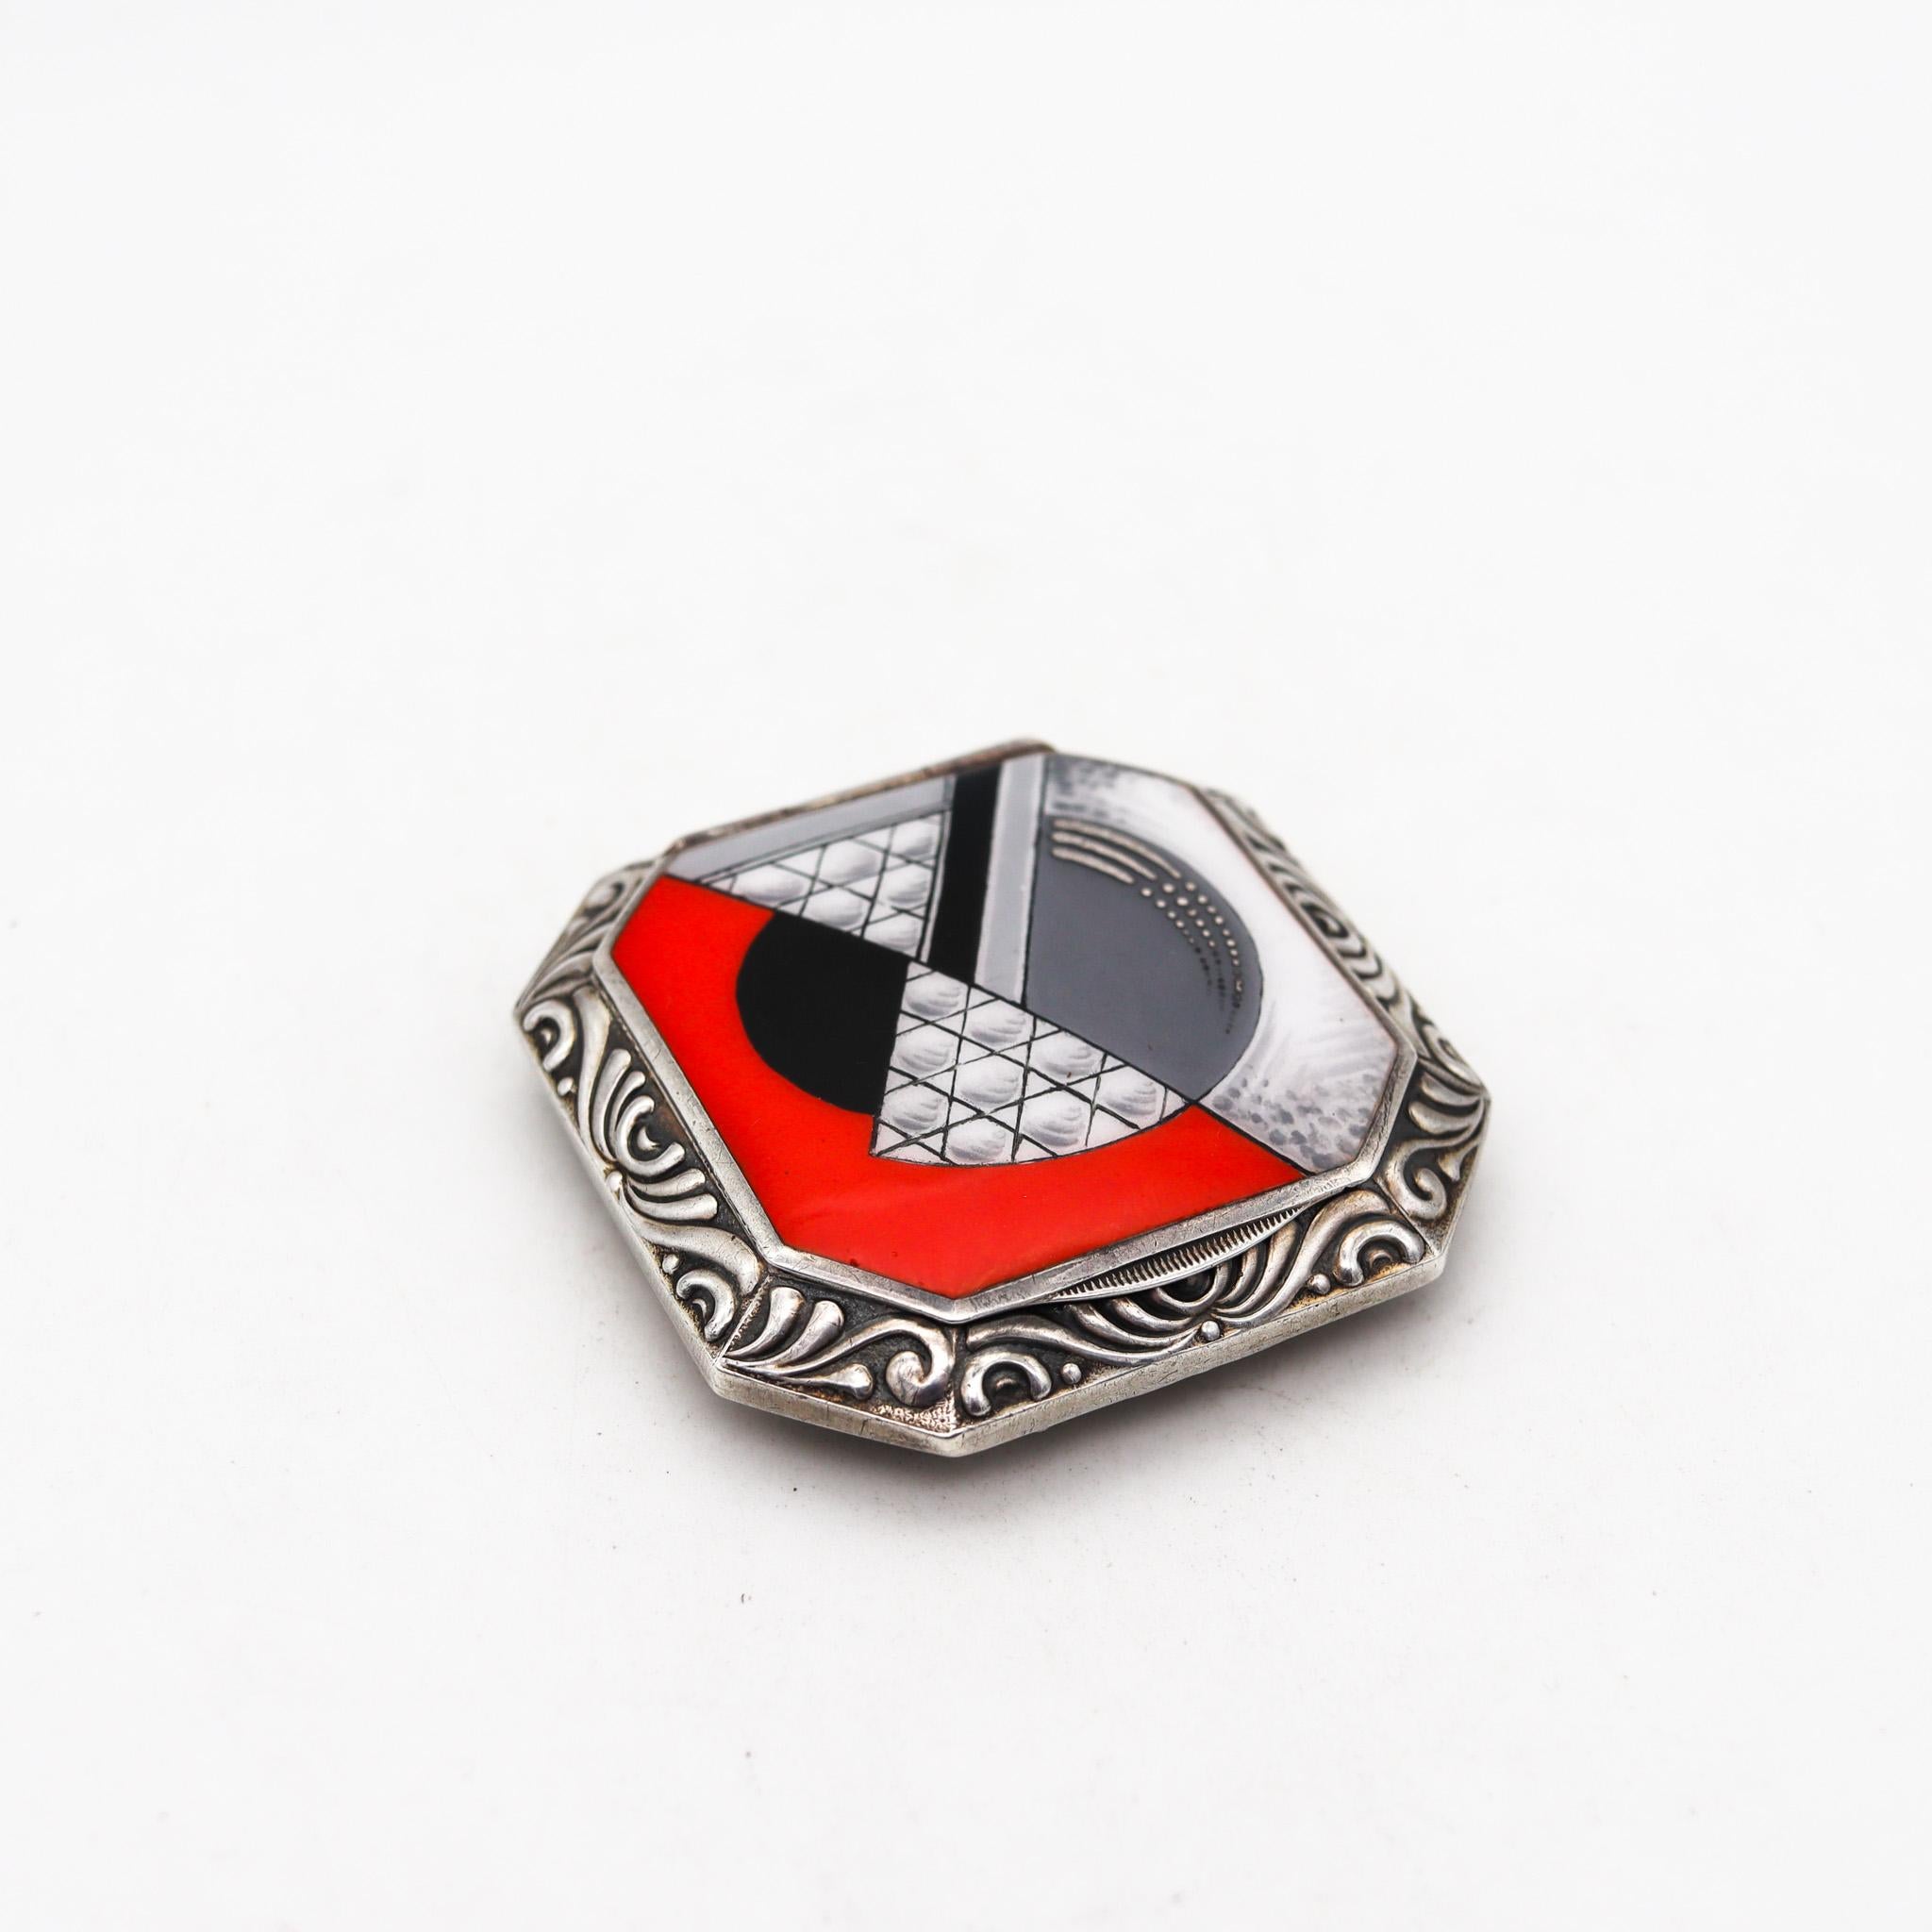 German geometric enameled pill box attributed to Herbert Bayer.

An exceptional representative piece of the Bauhaus art movement. This box has been made in Germany during the art deco period, back in the 1923. Crafted in an squared shape with